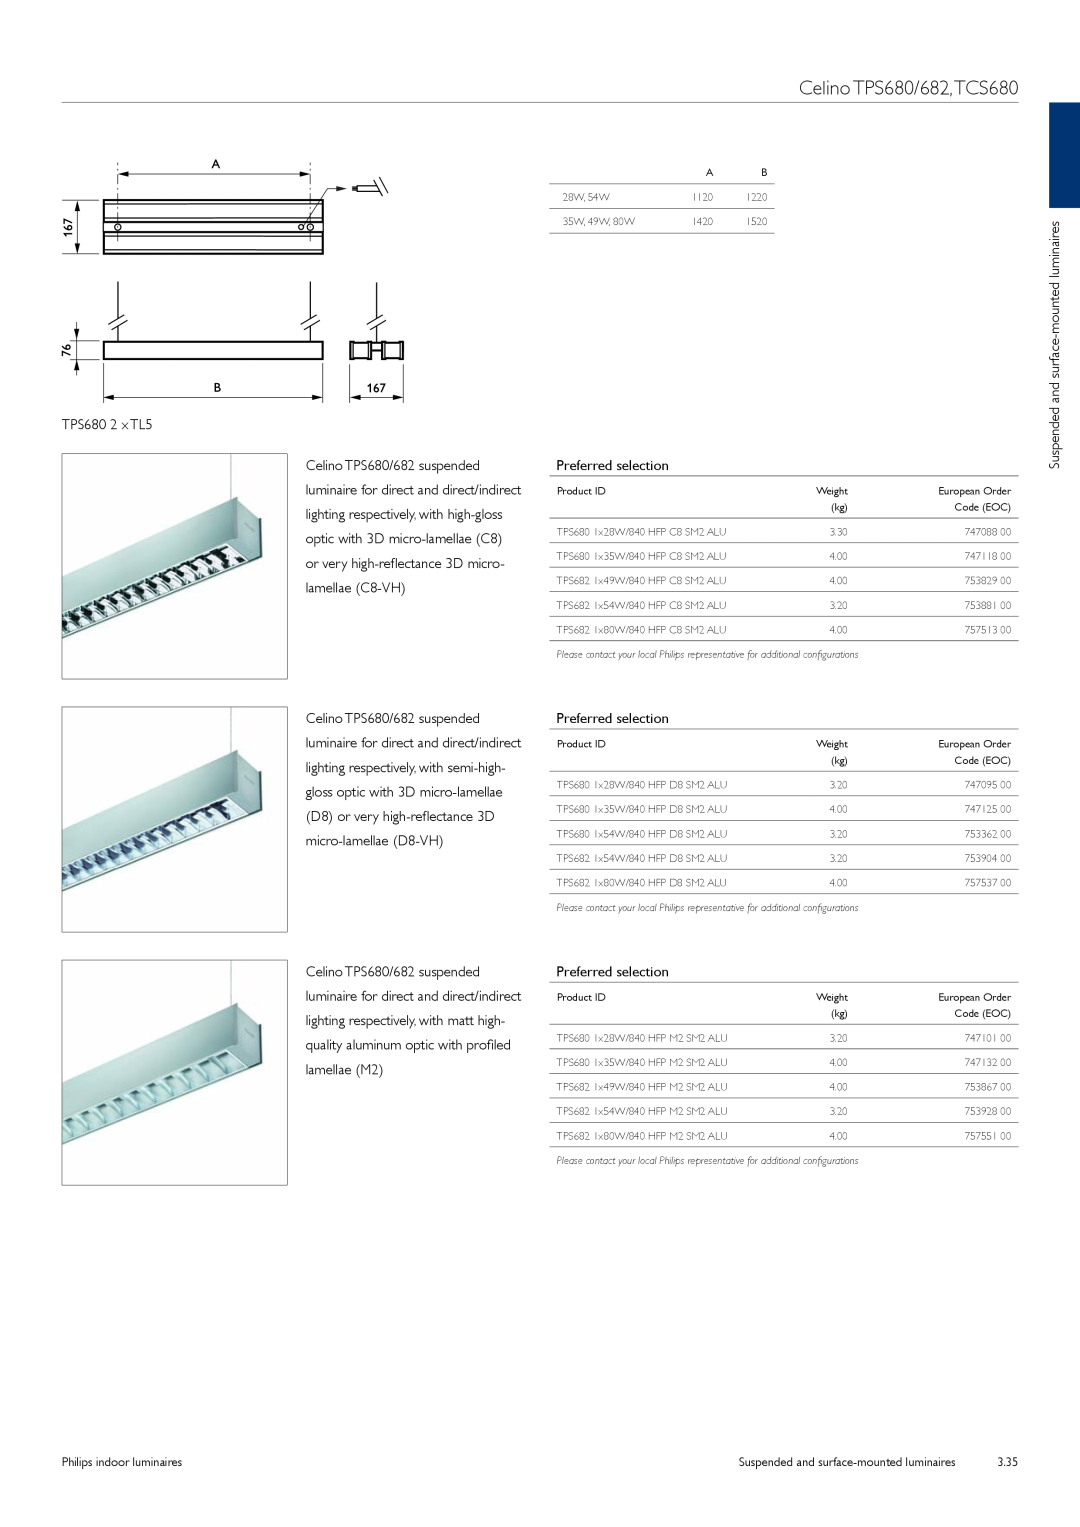 Philips TCS125 Celino TPS680/682,TCS680, TPS680 2 x TL5, Preferred selection, Suspended and surface-mountedluminaires 